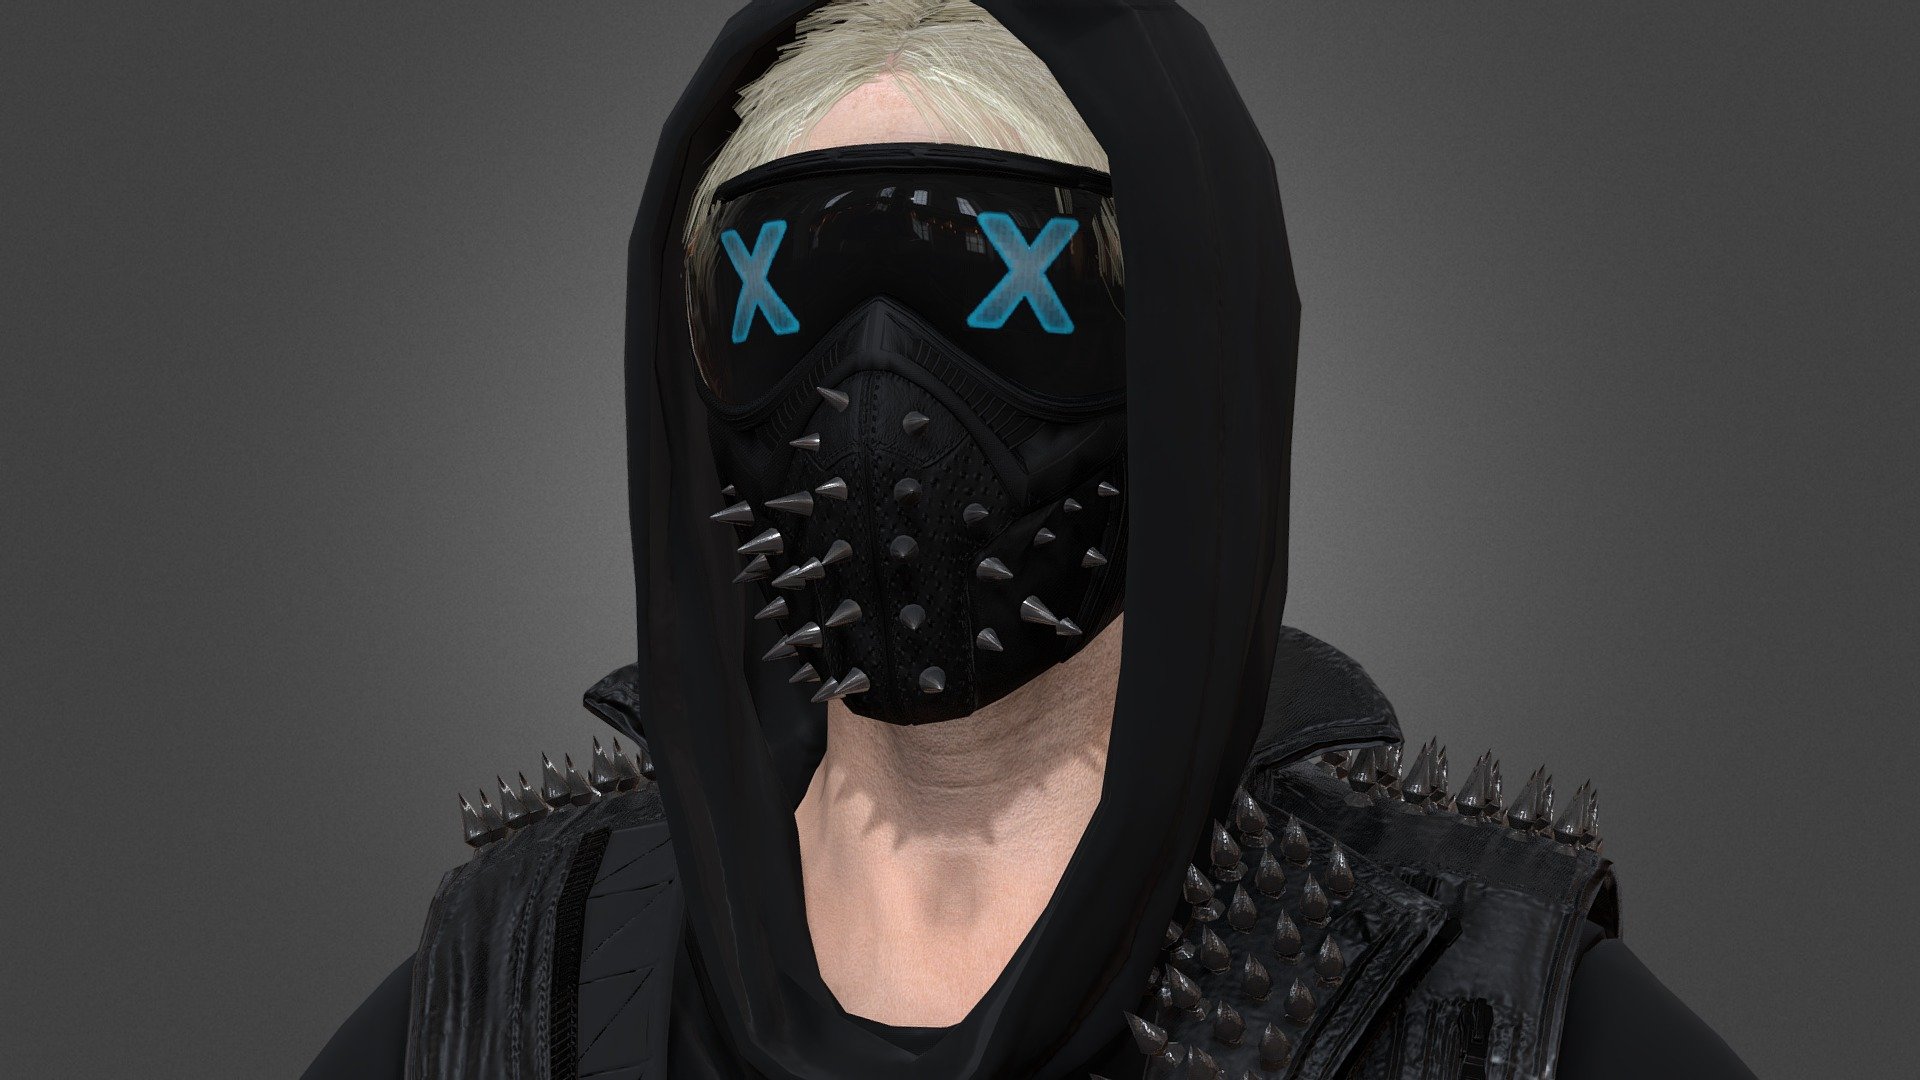 Download here: Deviantart

Model from the game Watch Dogs Legion, developed by Ubisoft. Well, I couldn't get the model setup correctly here (didn't even get to add his tattoo), so I suggest you look at the preview on Deviantart, this is what it might look like 3d model